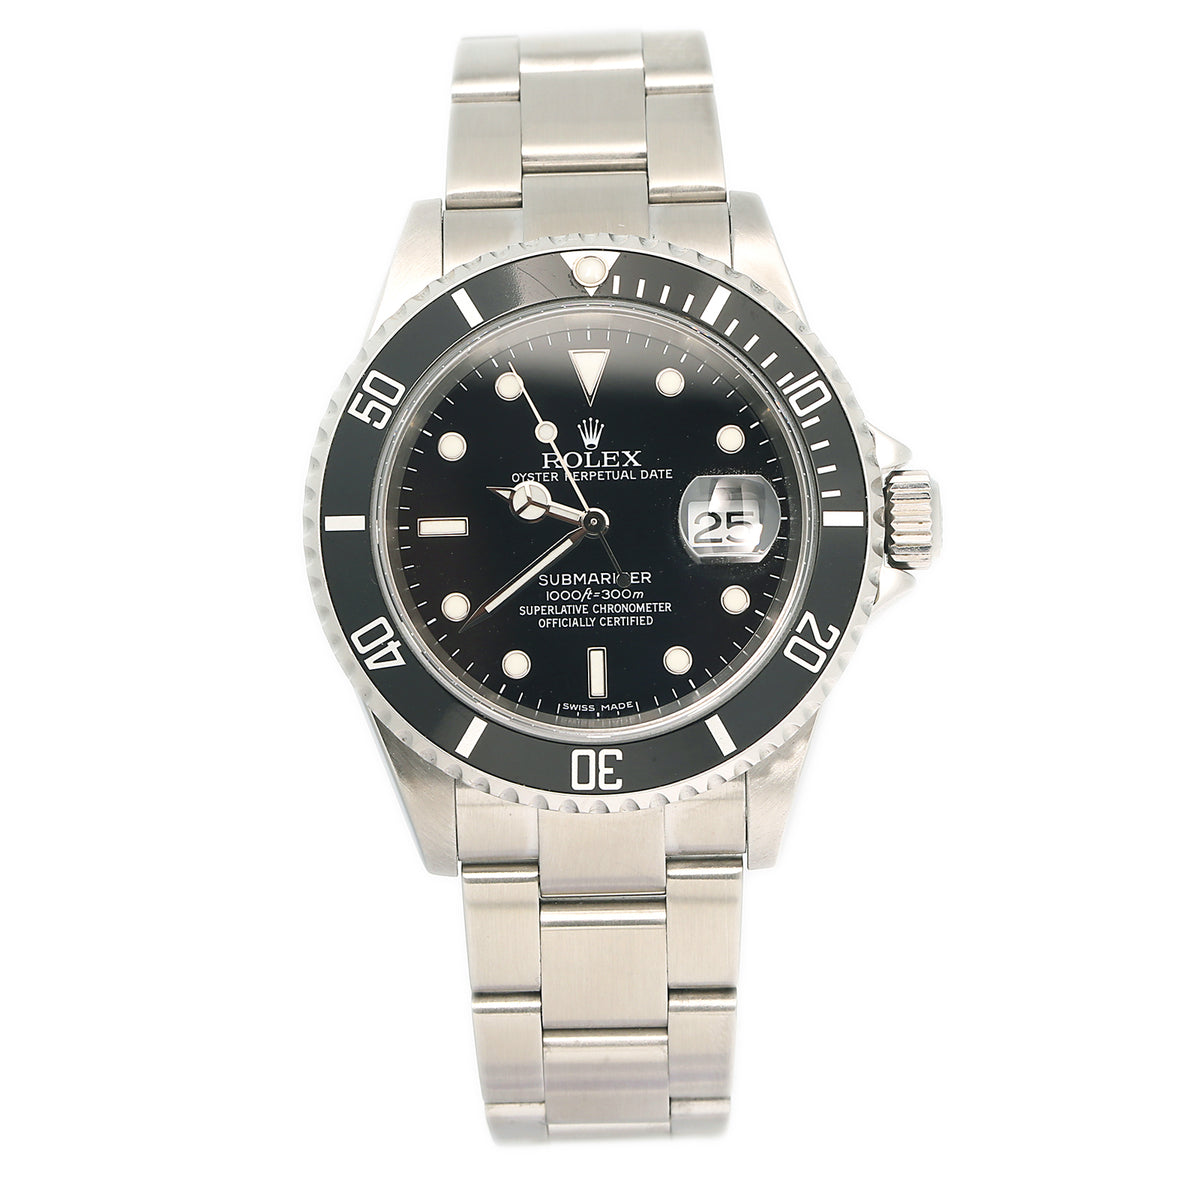 Rolex Submariner 16610T Stainless Steel Black Dial Automatic Men's Watch 40mm